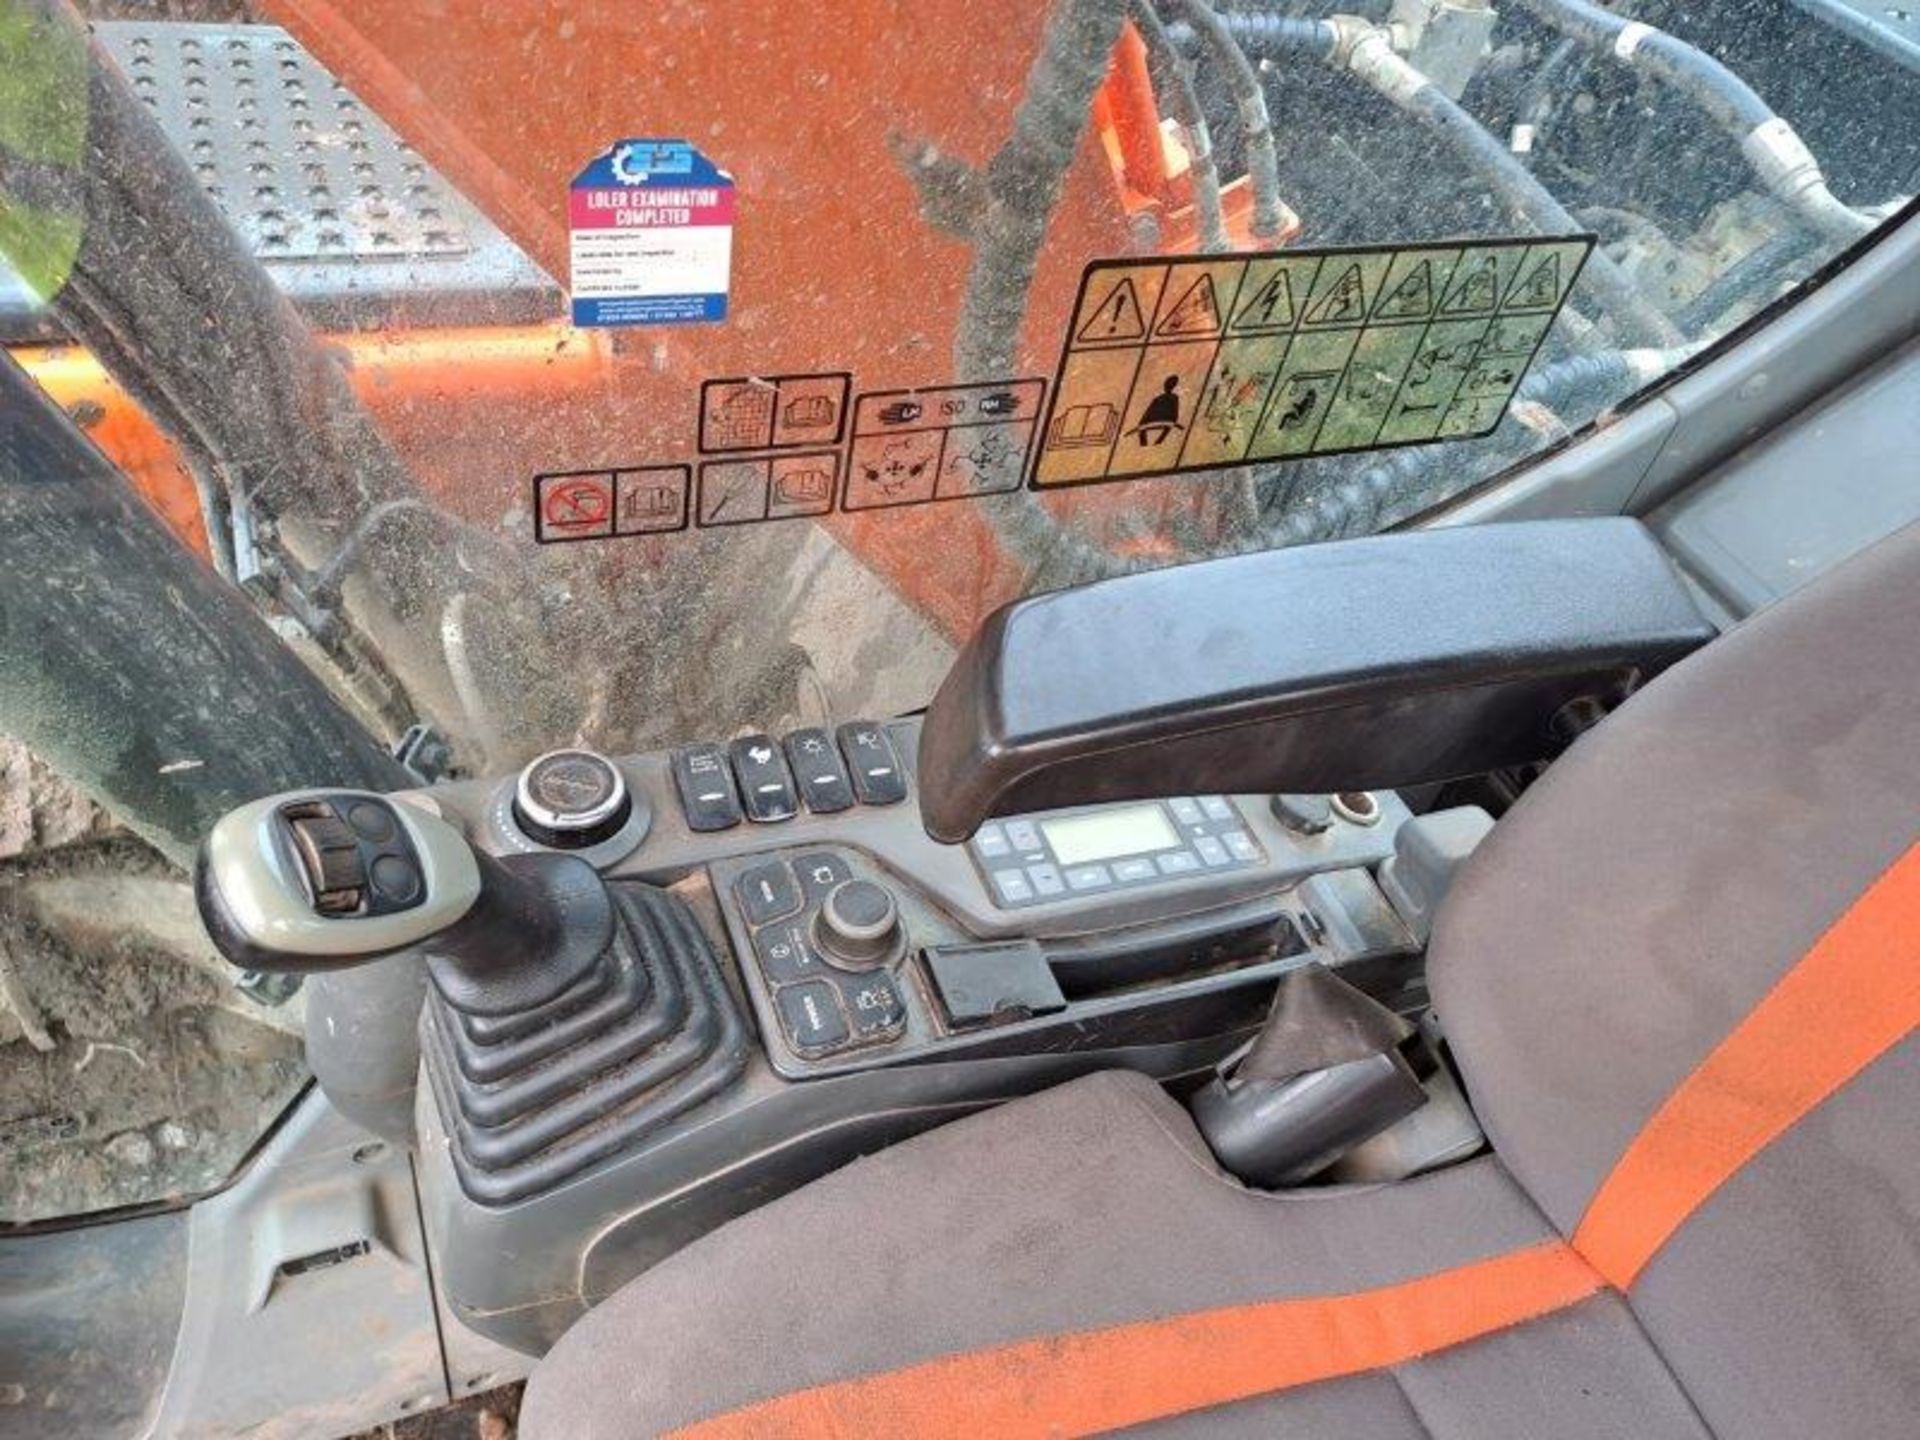 Doosan DX140LC-5 14t excavator, serial no. DHKCEBBRCH0001494, Year: 2017, Hours: 7,418, Key: 1, with - Image 16 of 18